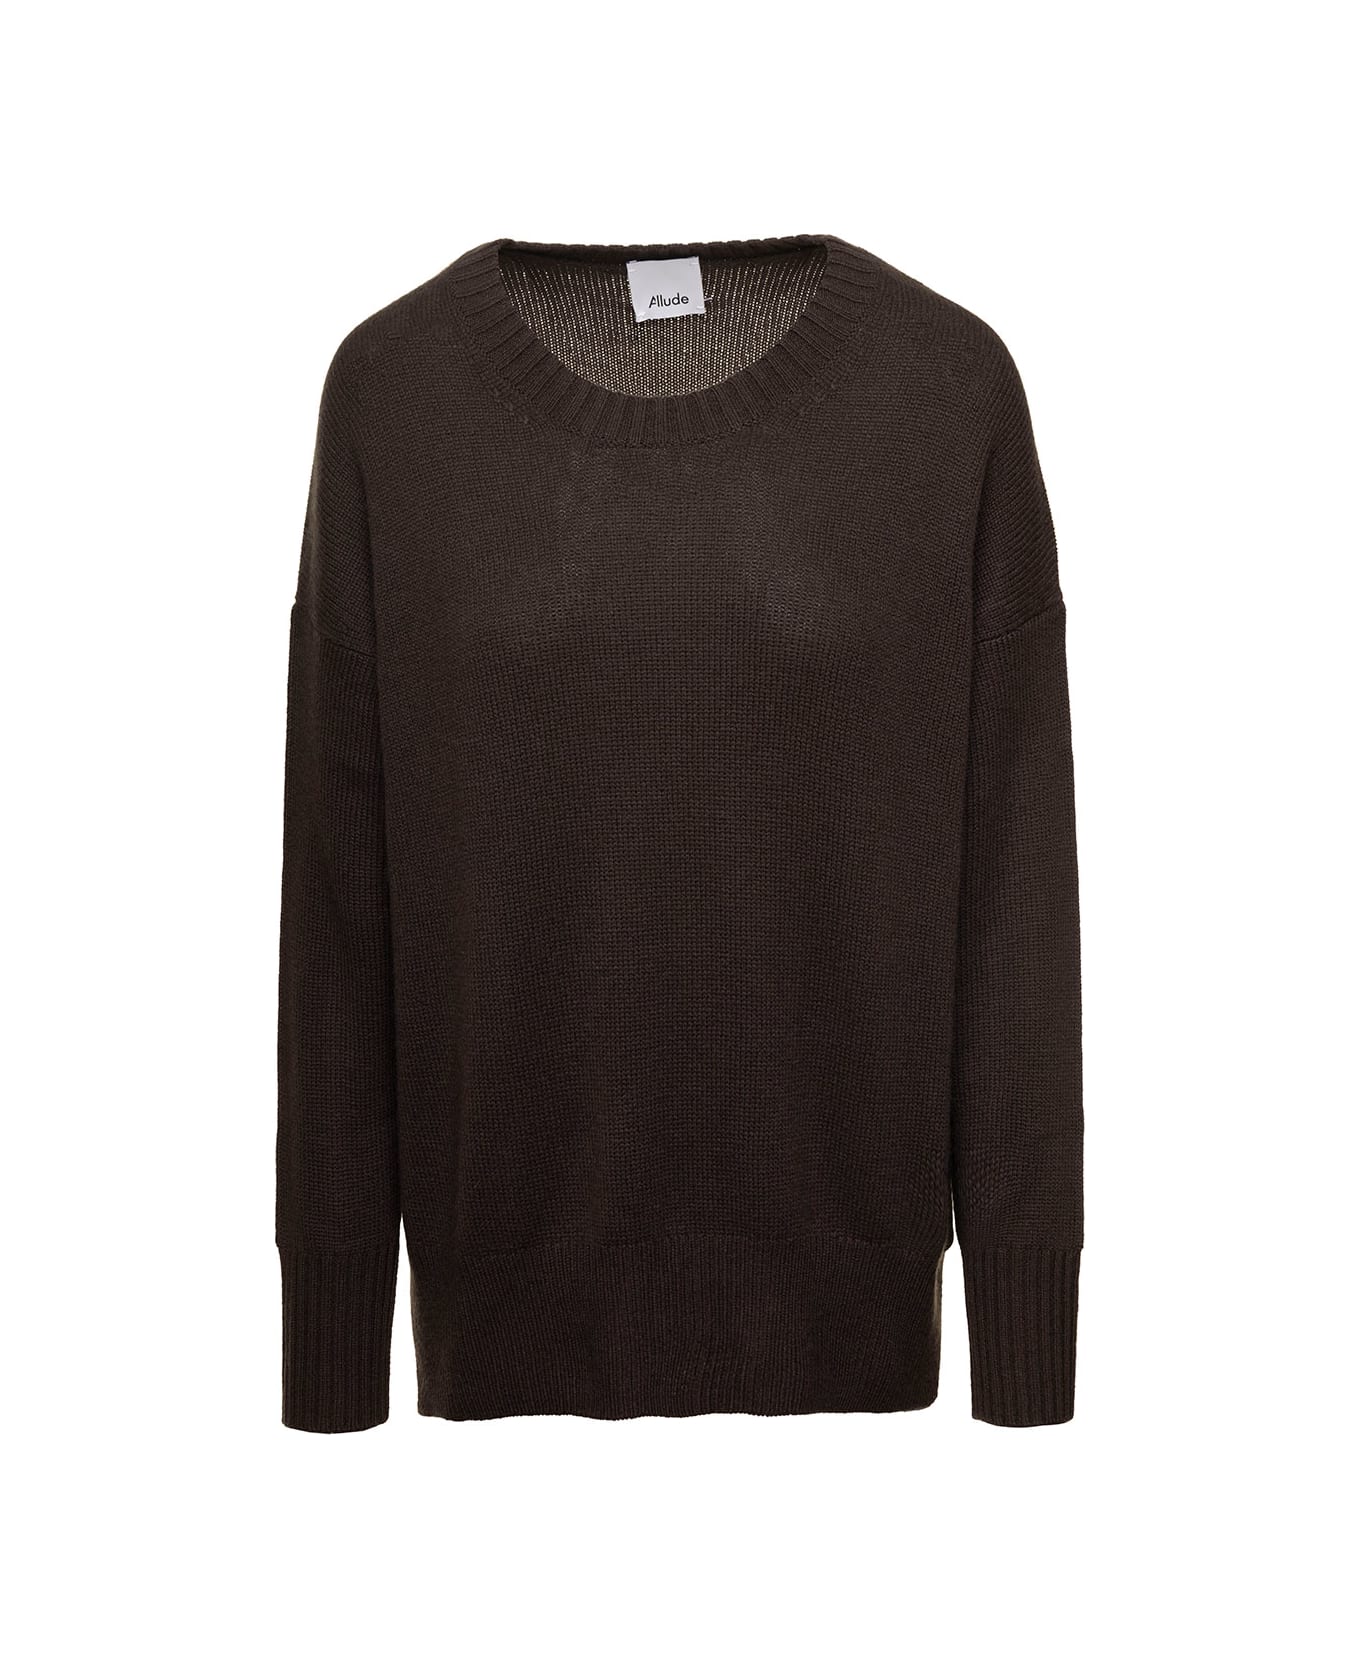 Allude Brown Sweater With U Neckline In Cashmere Woman - Brown